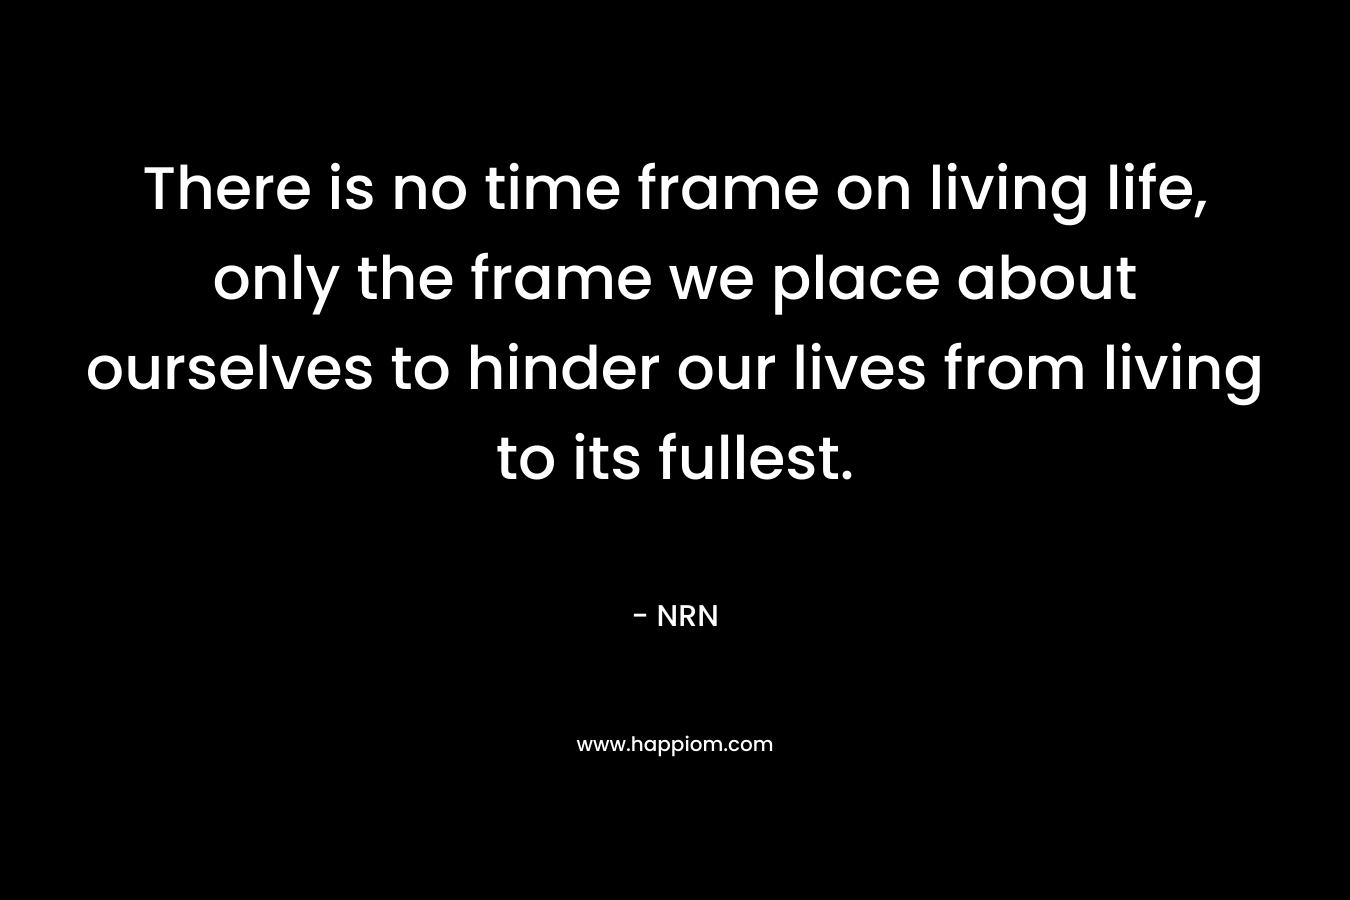 There is no time frame on living life, only the frame we place about ourselves to hinder our lives from living to its fullest.